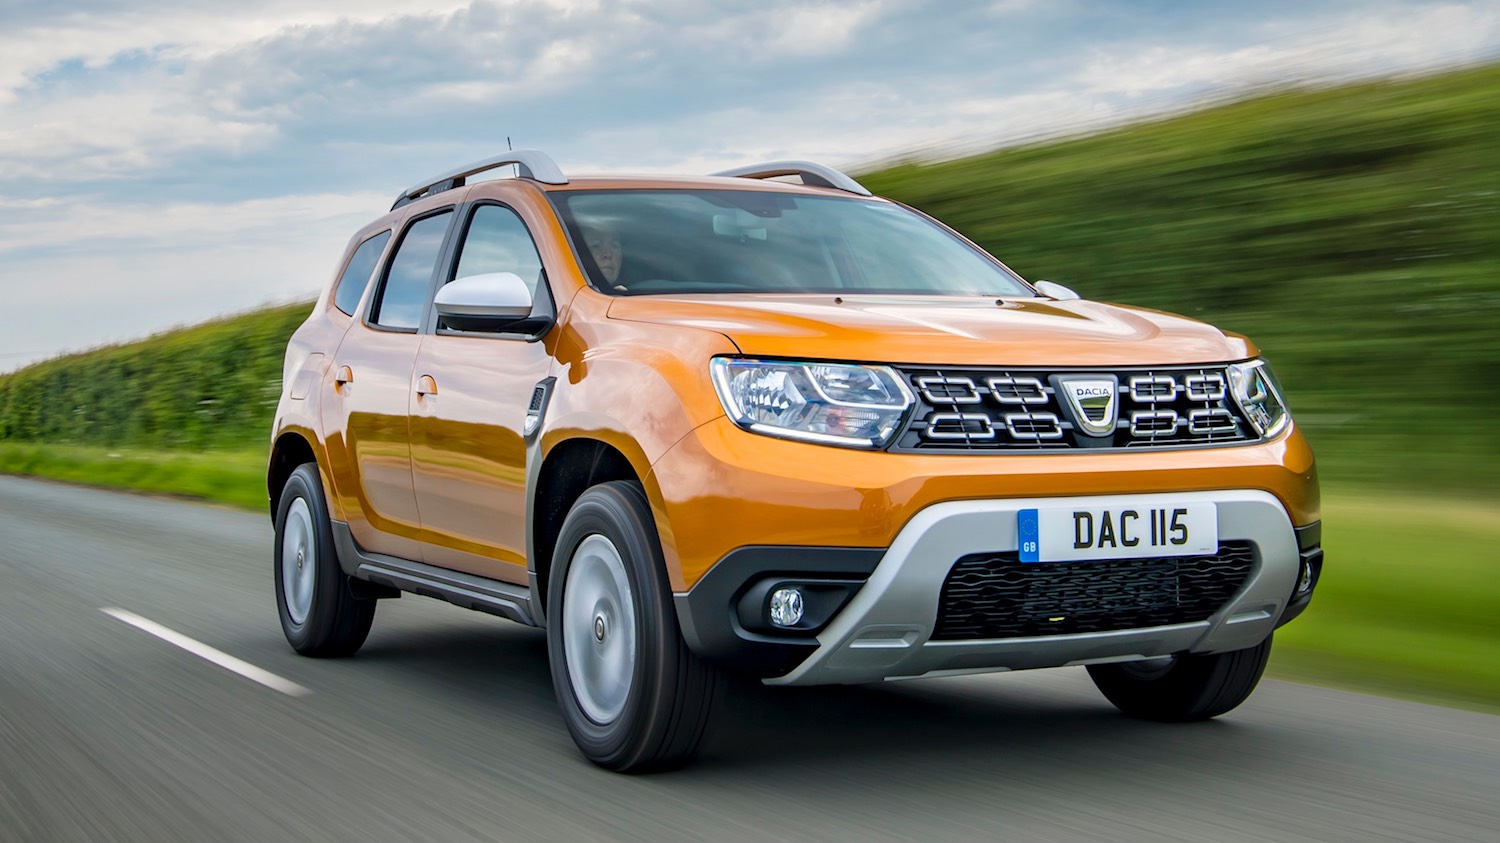 Neil Lyndon revisits and reviews the All New Dacia Duster 15